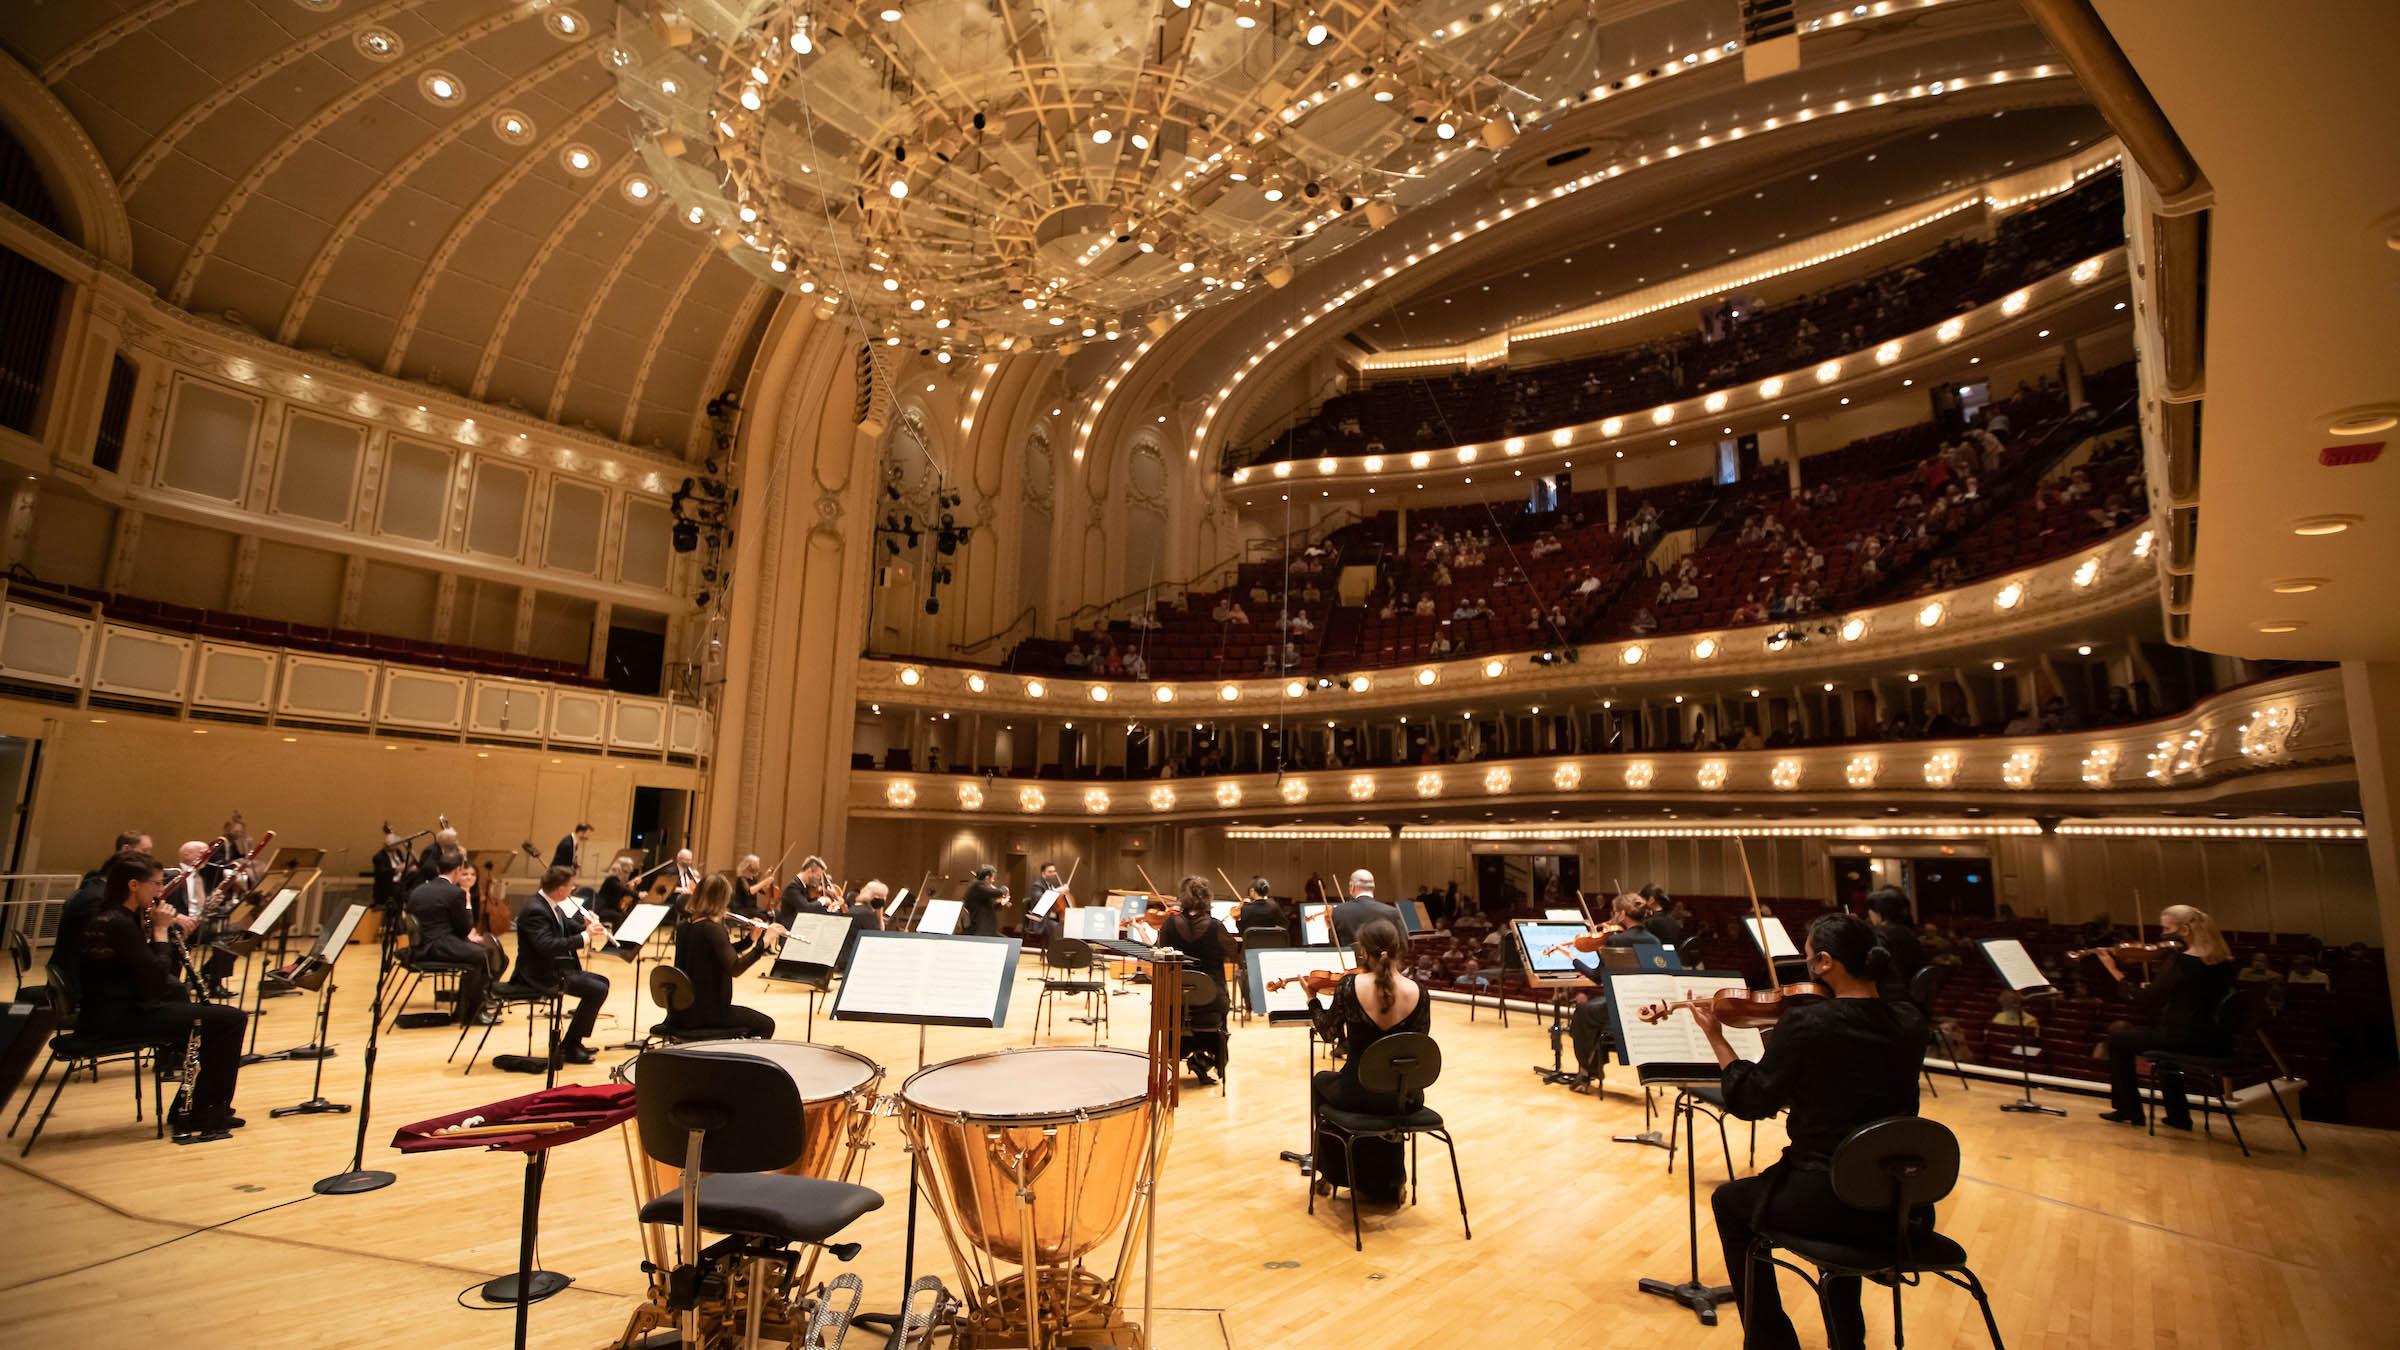 Musicians of the Chicago Symphony Orchestra onstage in Orchestra Hall, June 10, 2021 (Credit Anne Ryan)